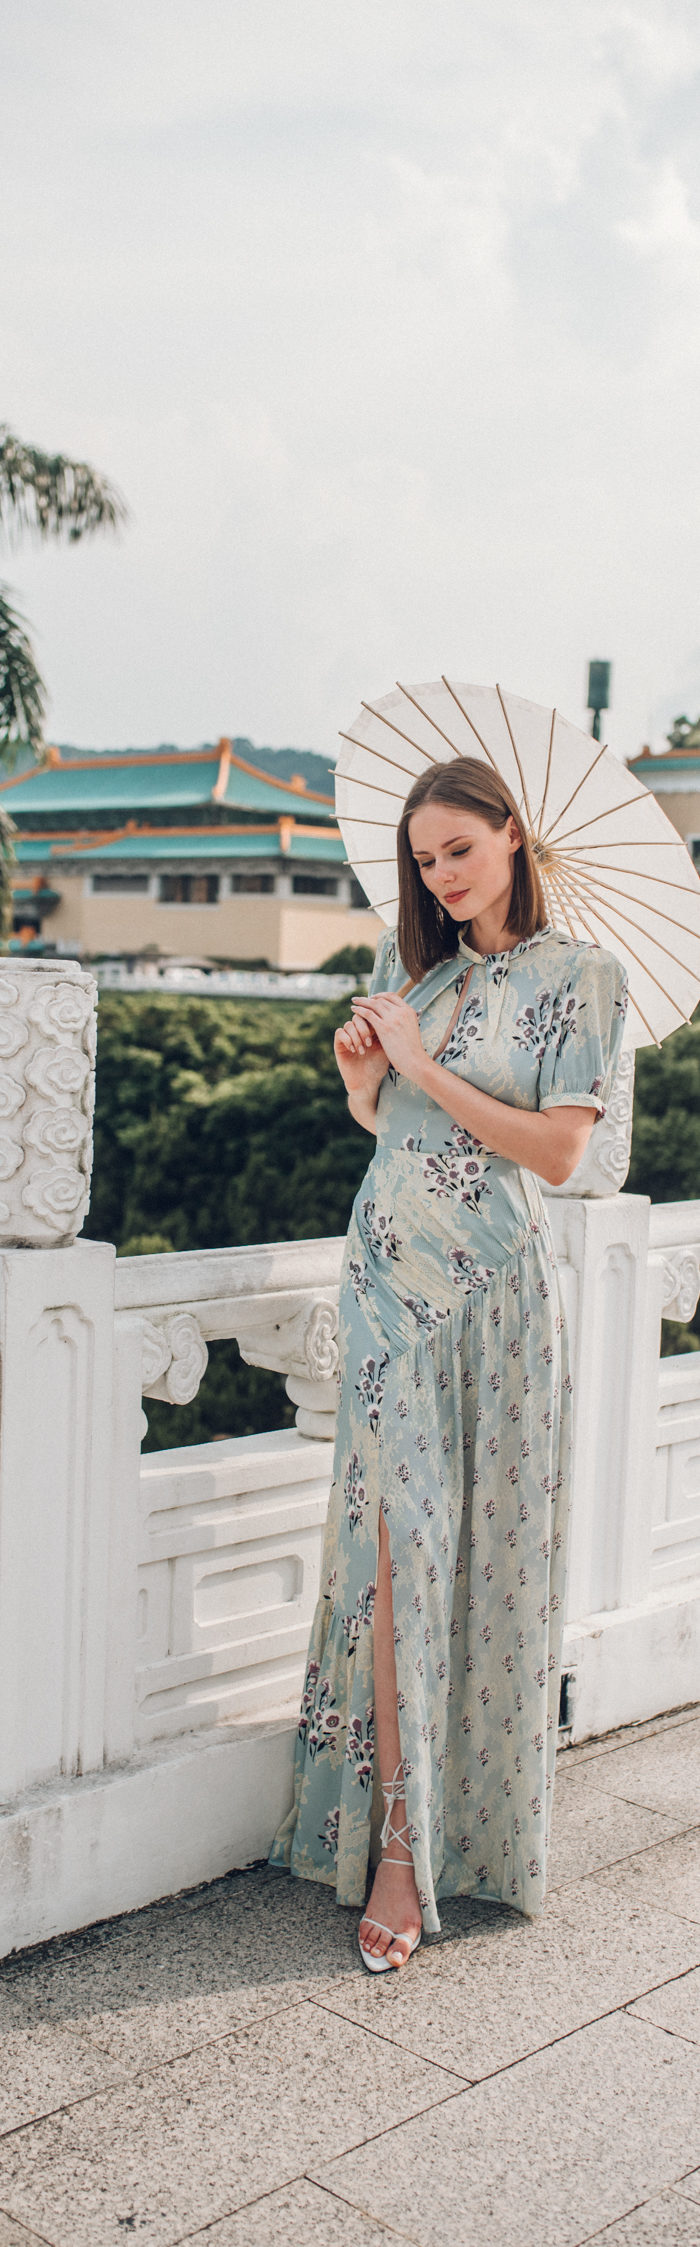 Alyssa Campanella of The A List blog visits Taipei for 24 hours wearing Self Portrait